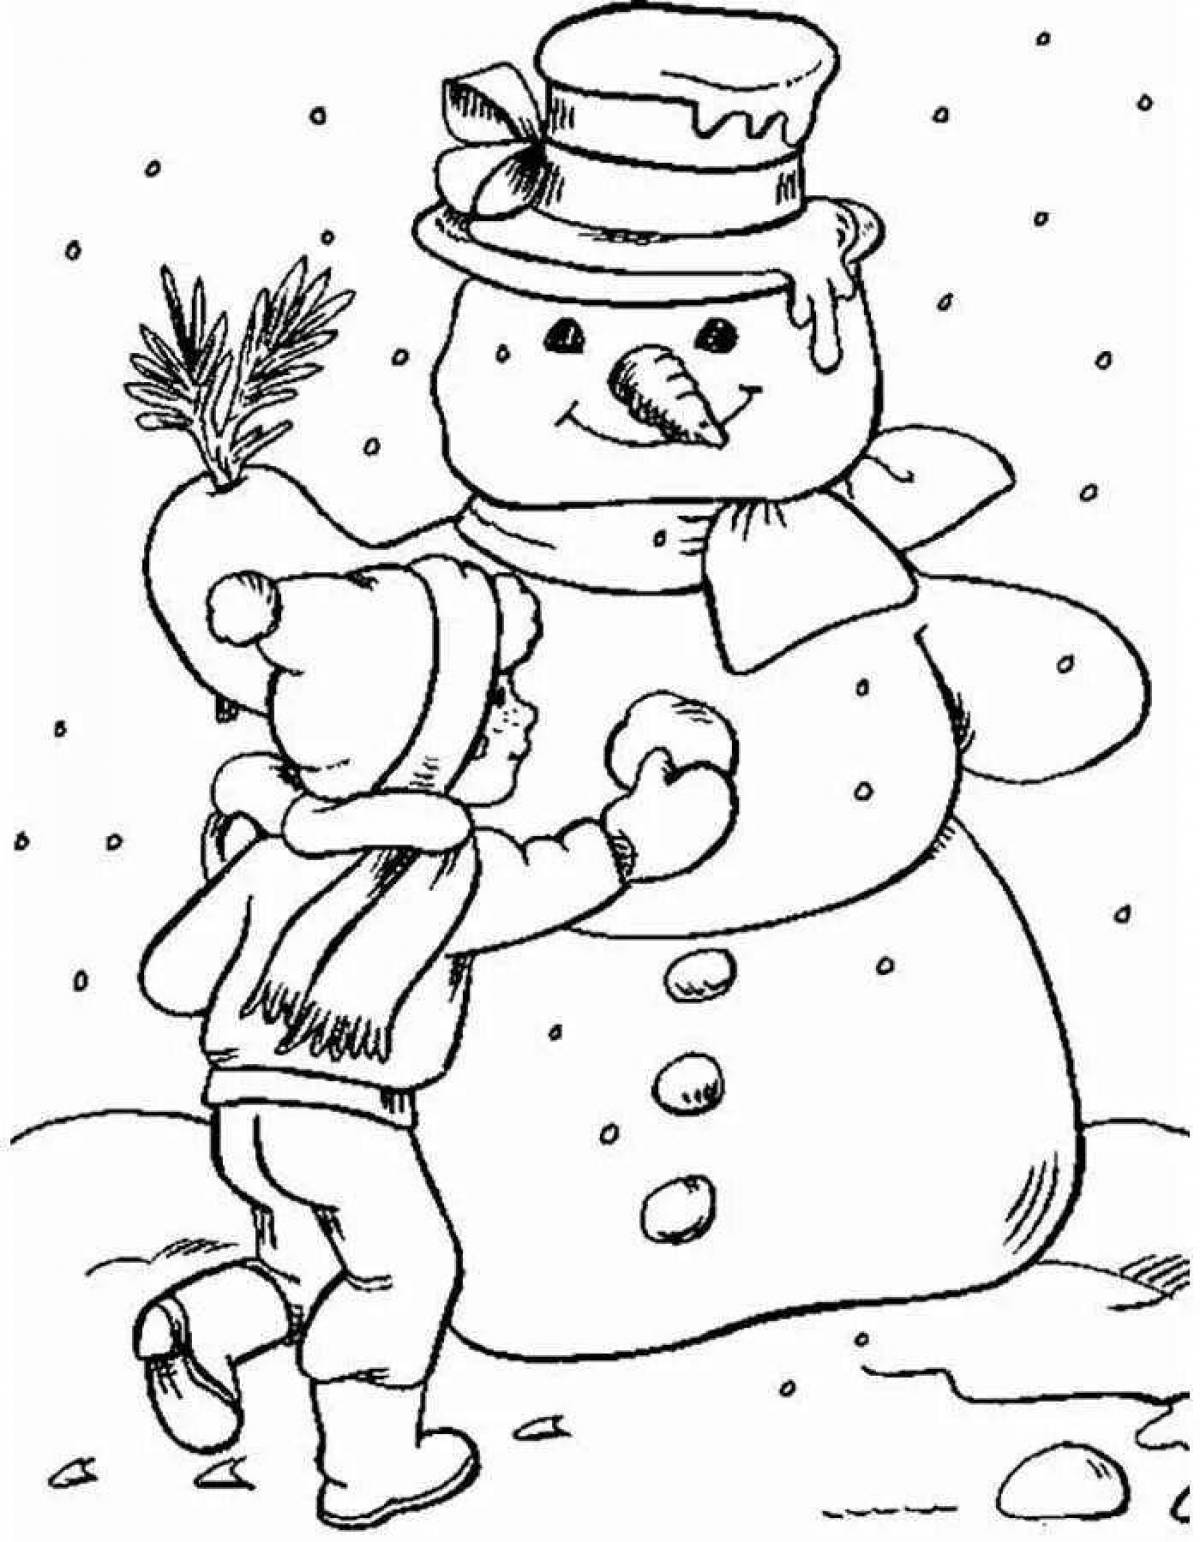 Charming snowman coloring book